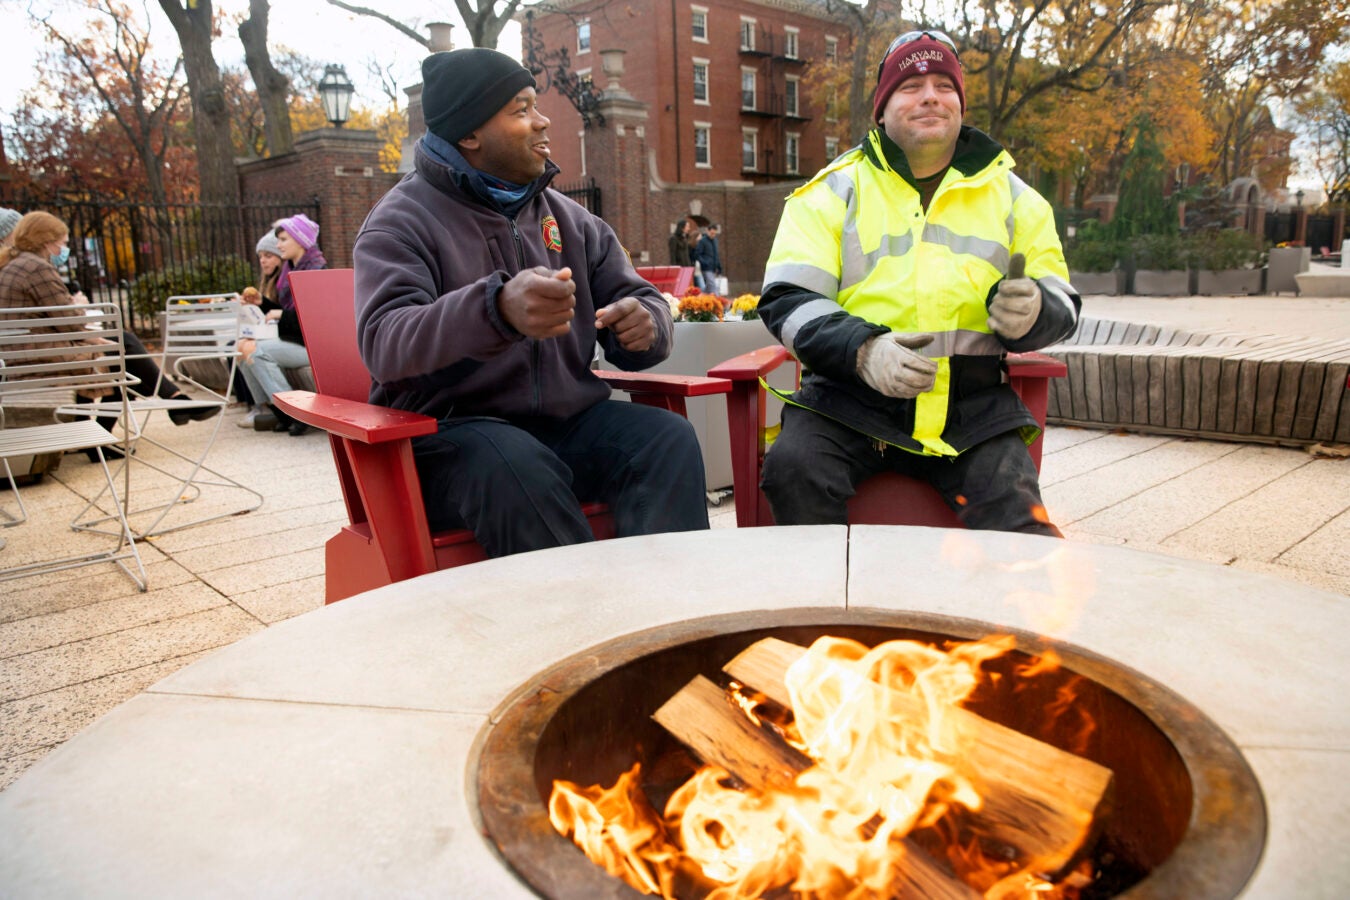 Cambridge firefighter John Barnard (left) and Mike Paskeywitz, a facility maintenance operation and campus service, warm their hands in the Fire Pit at Science Center Plaza.